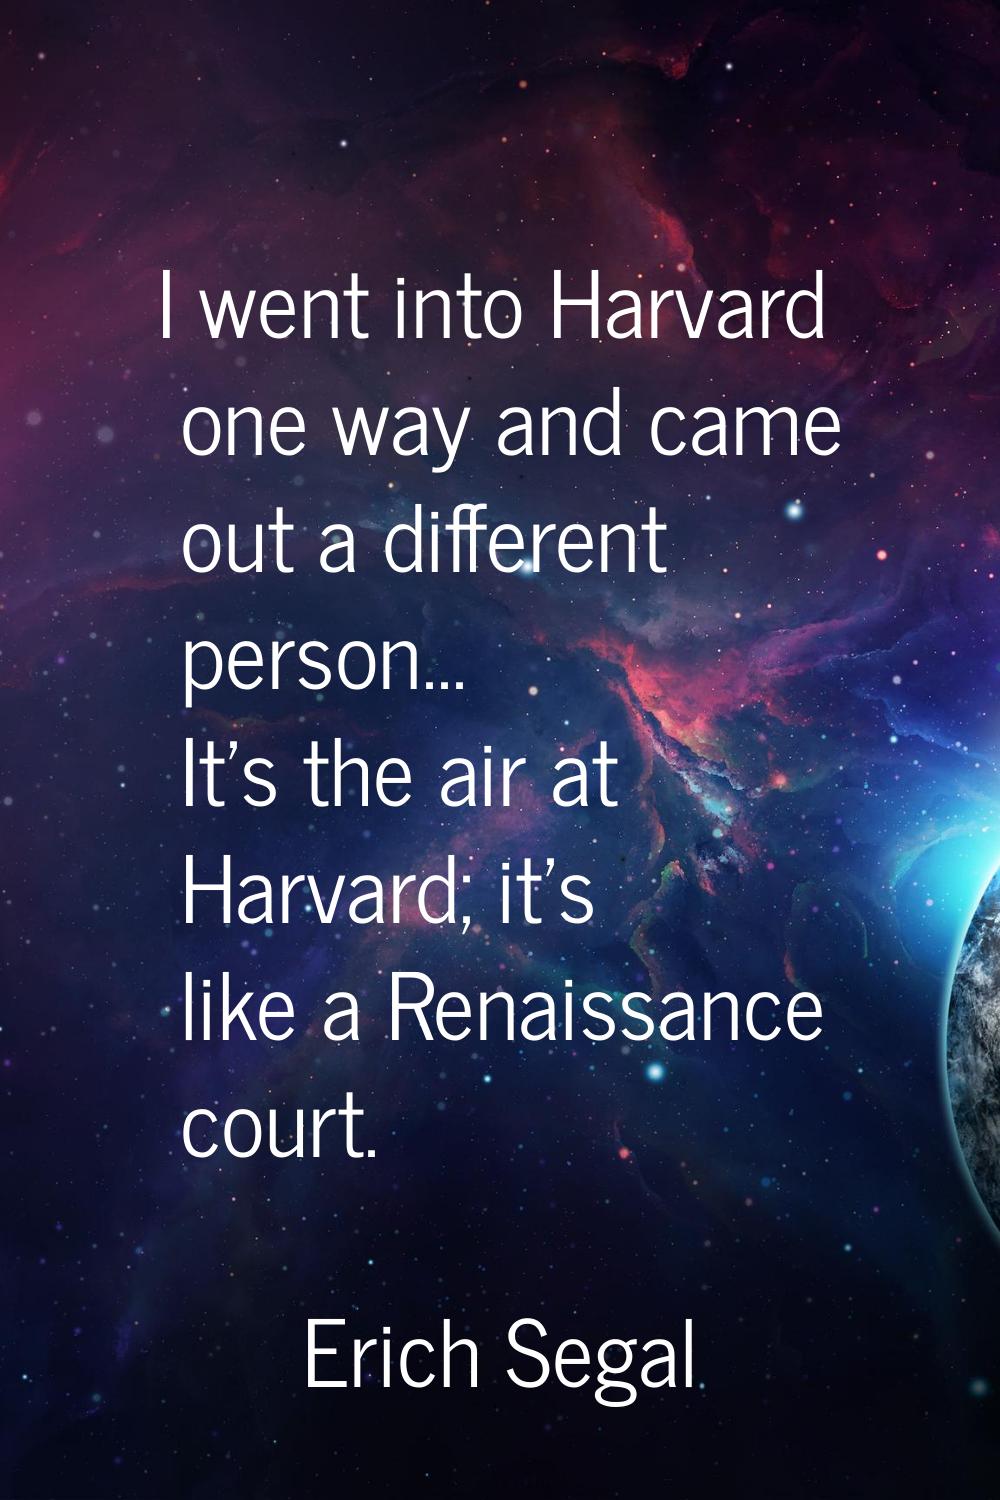 I went into Harvard one way and came out a different person... It's the air at Harvard; it's like a